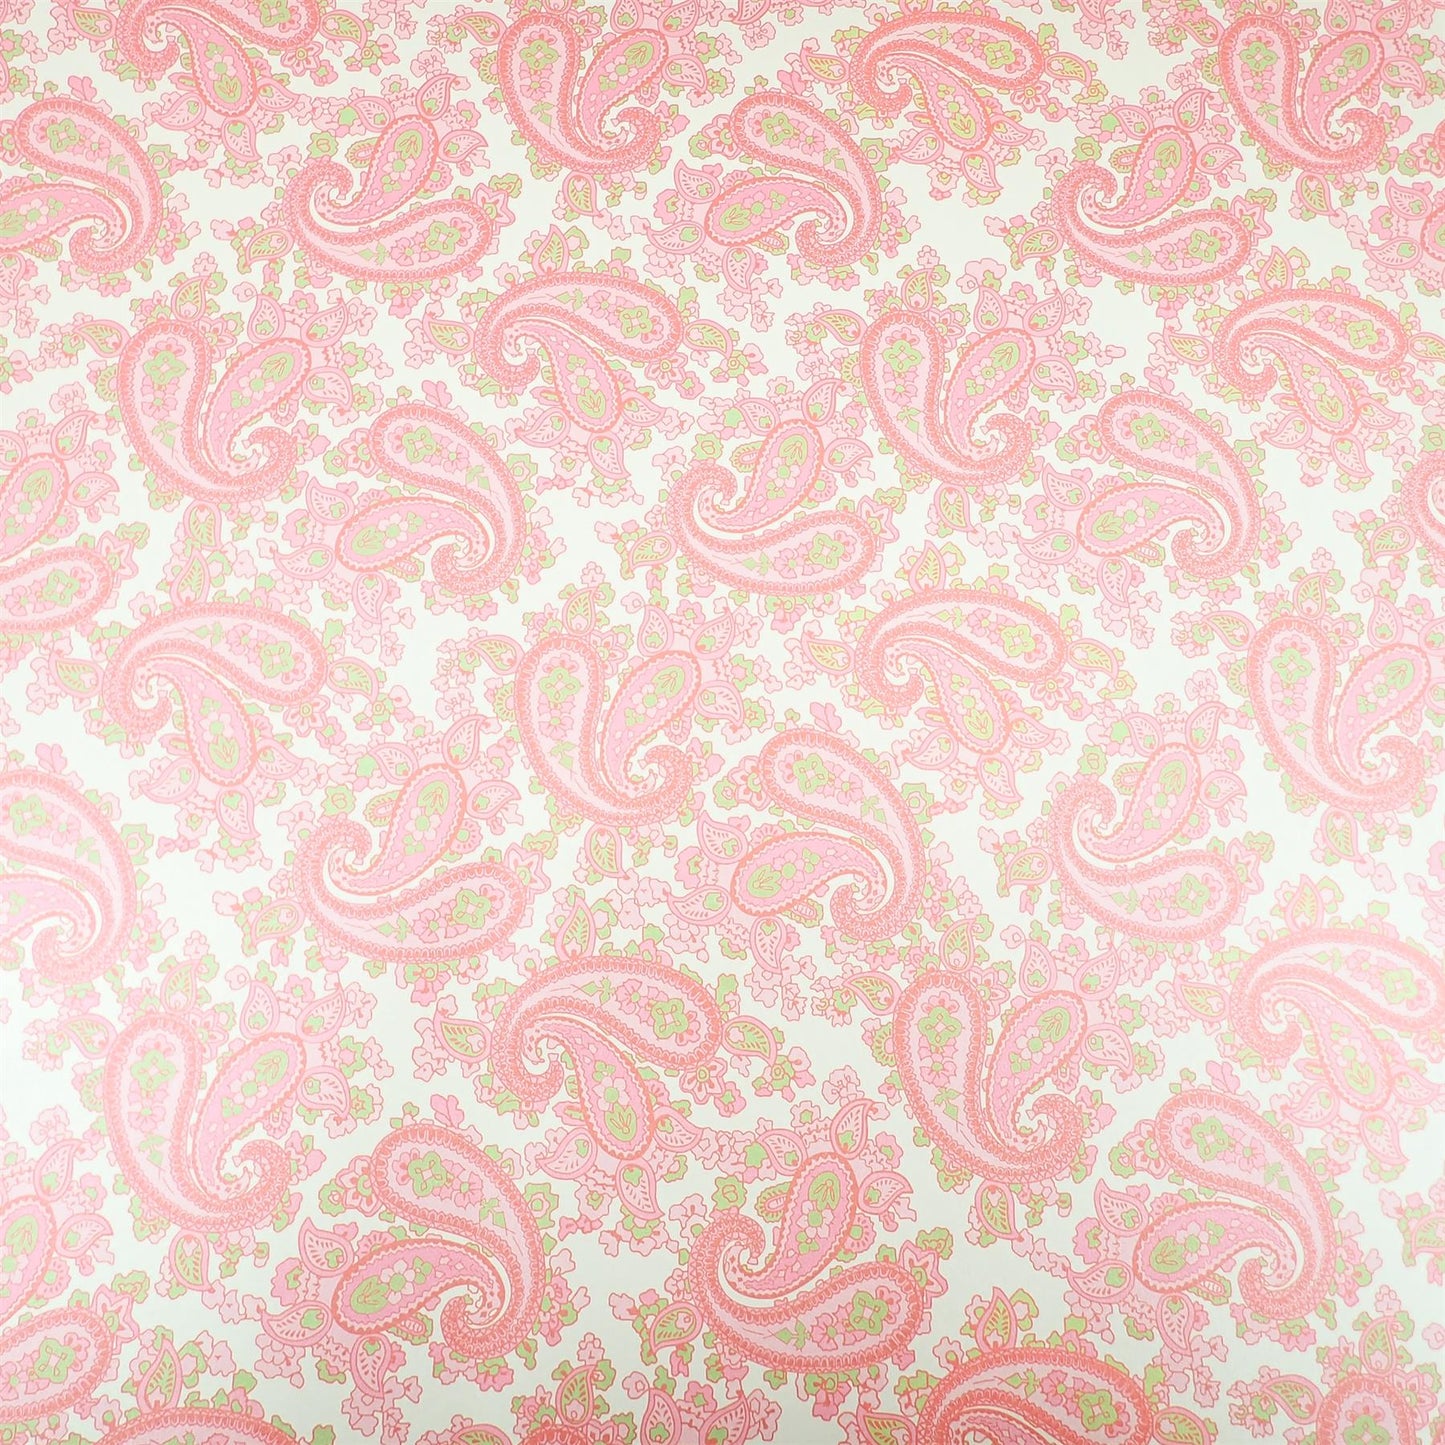 Luthitec Silver Backed Pink Paisley Paper Guitar Body Decal - 690x480mm